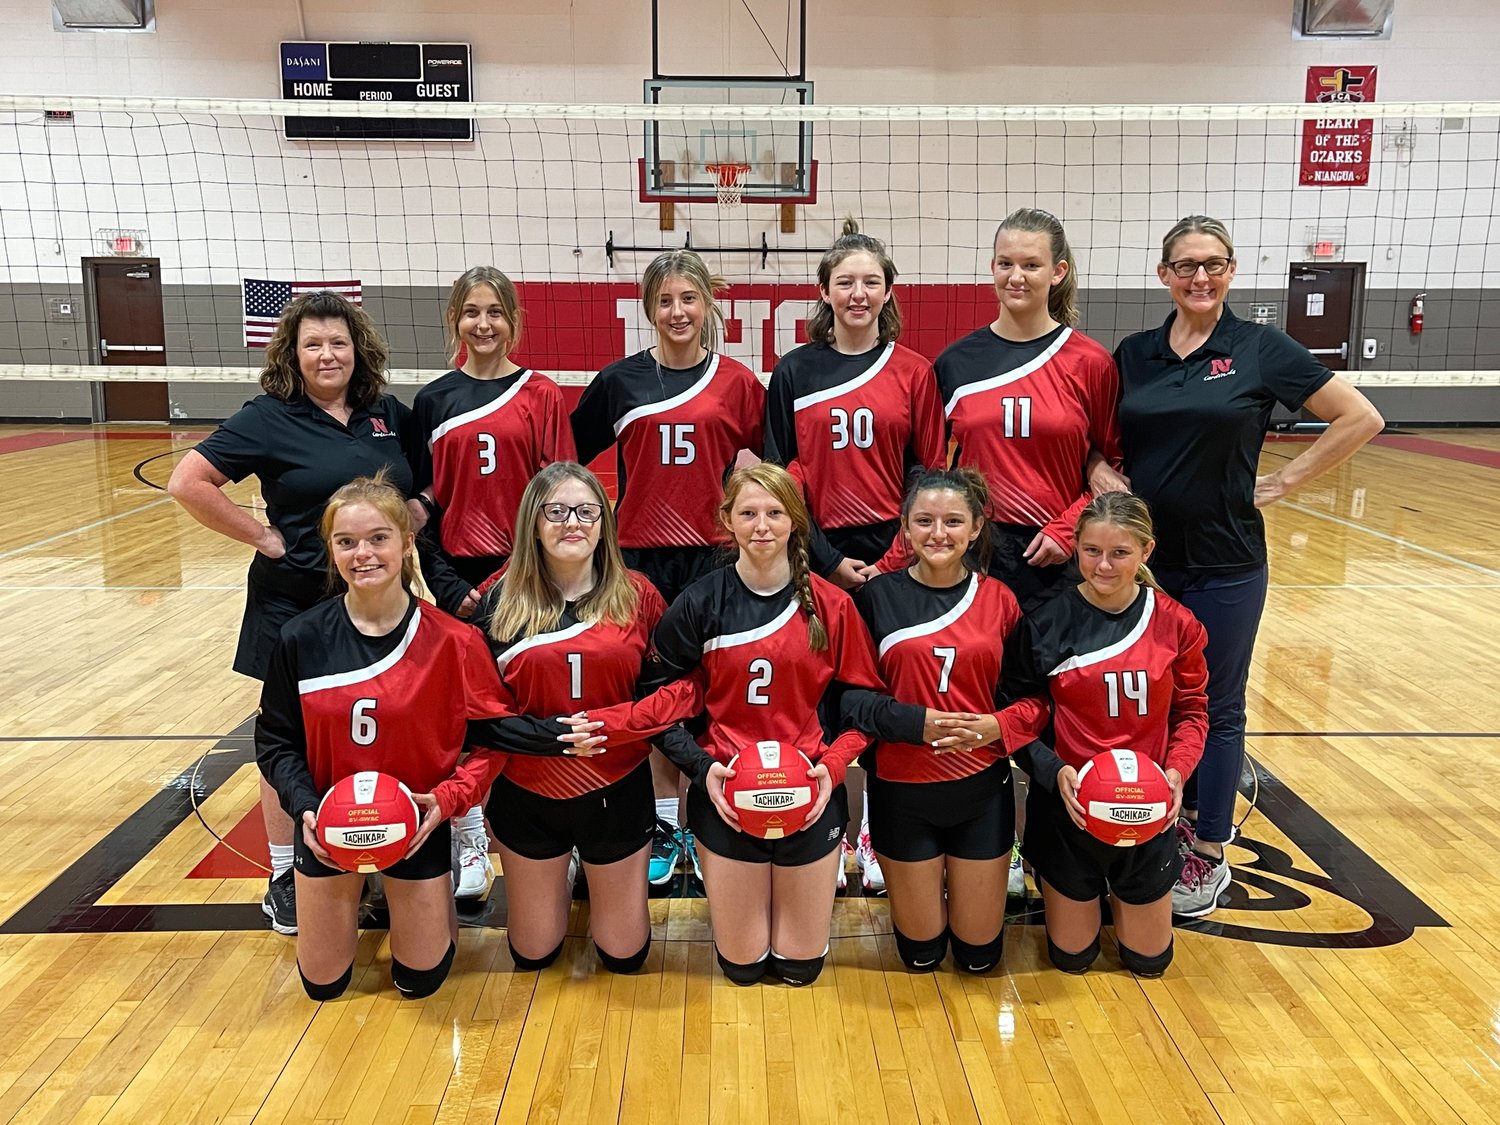 Niangua High School Lady Cardinals 2022-2023 Volleyball team, coached by head coach Lori Allen and assistant Coach Alisha York-Stradling